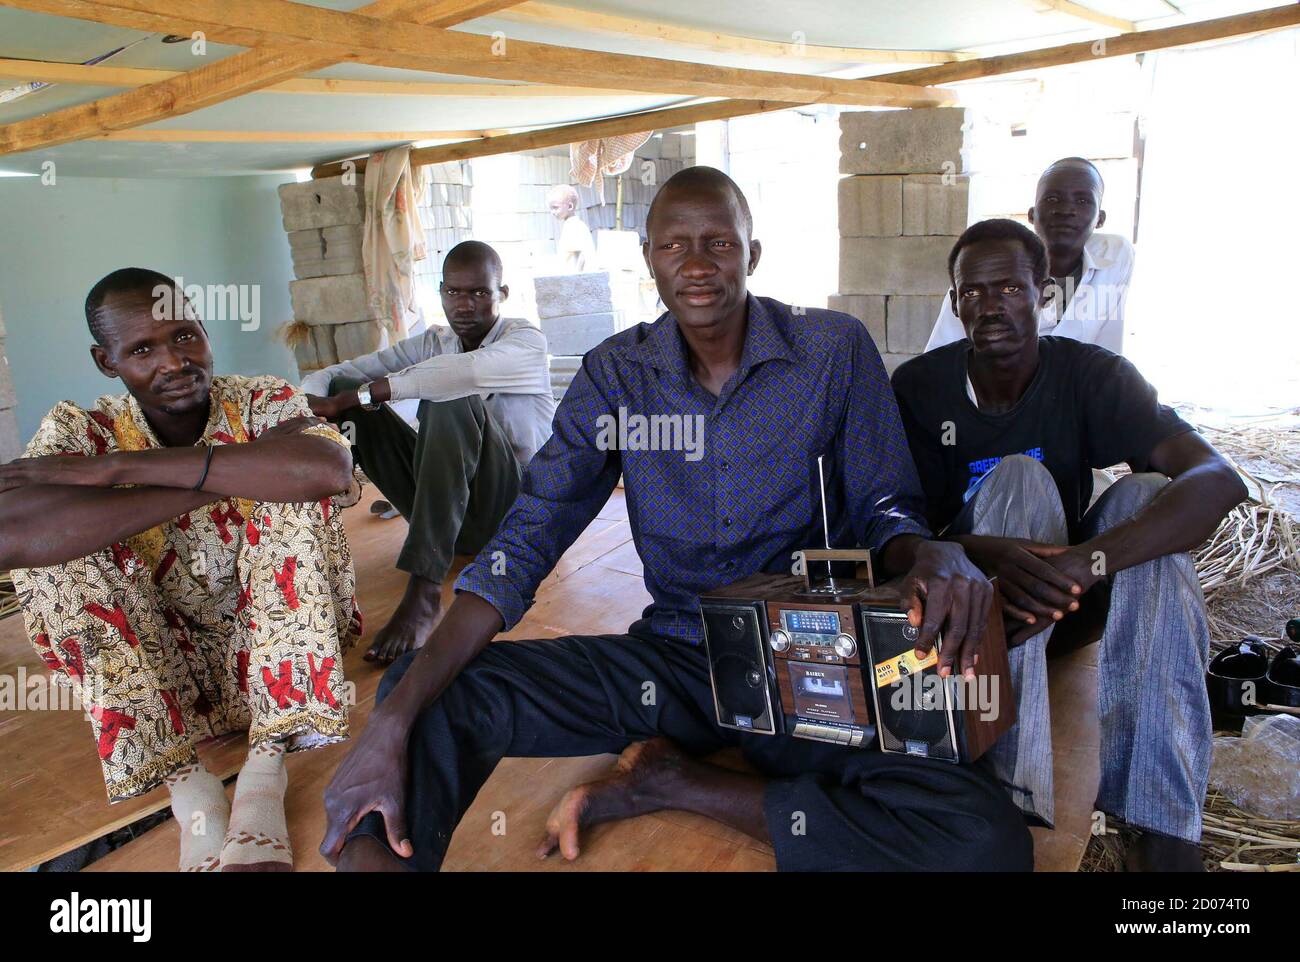 Men displaced by recent fighting in South Sudan listen to news on a radio  in a makeshift camp inside the United Nations Mission in Sudan (UNAMIS)  facility in Jabel, on the outskirts